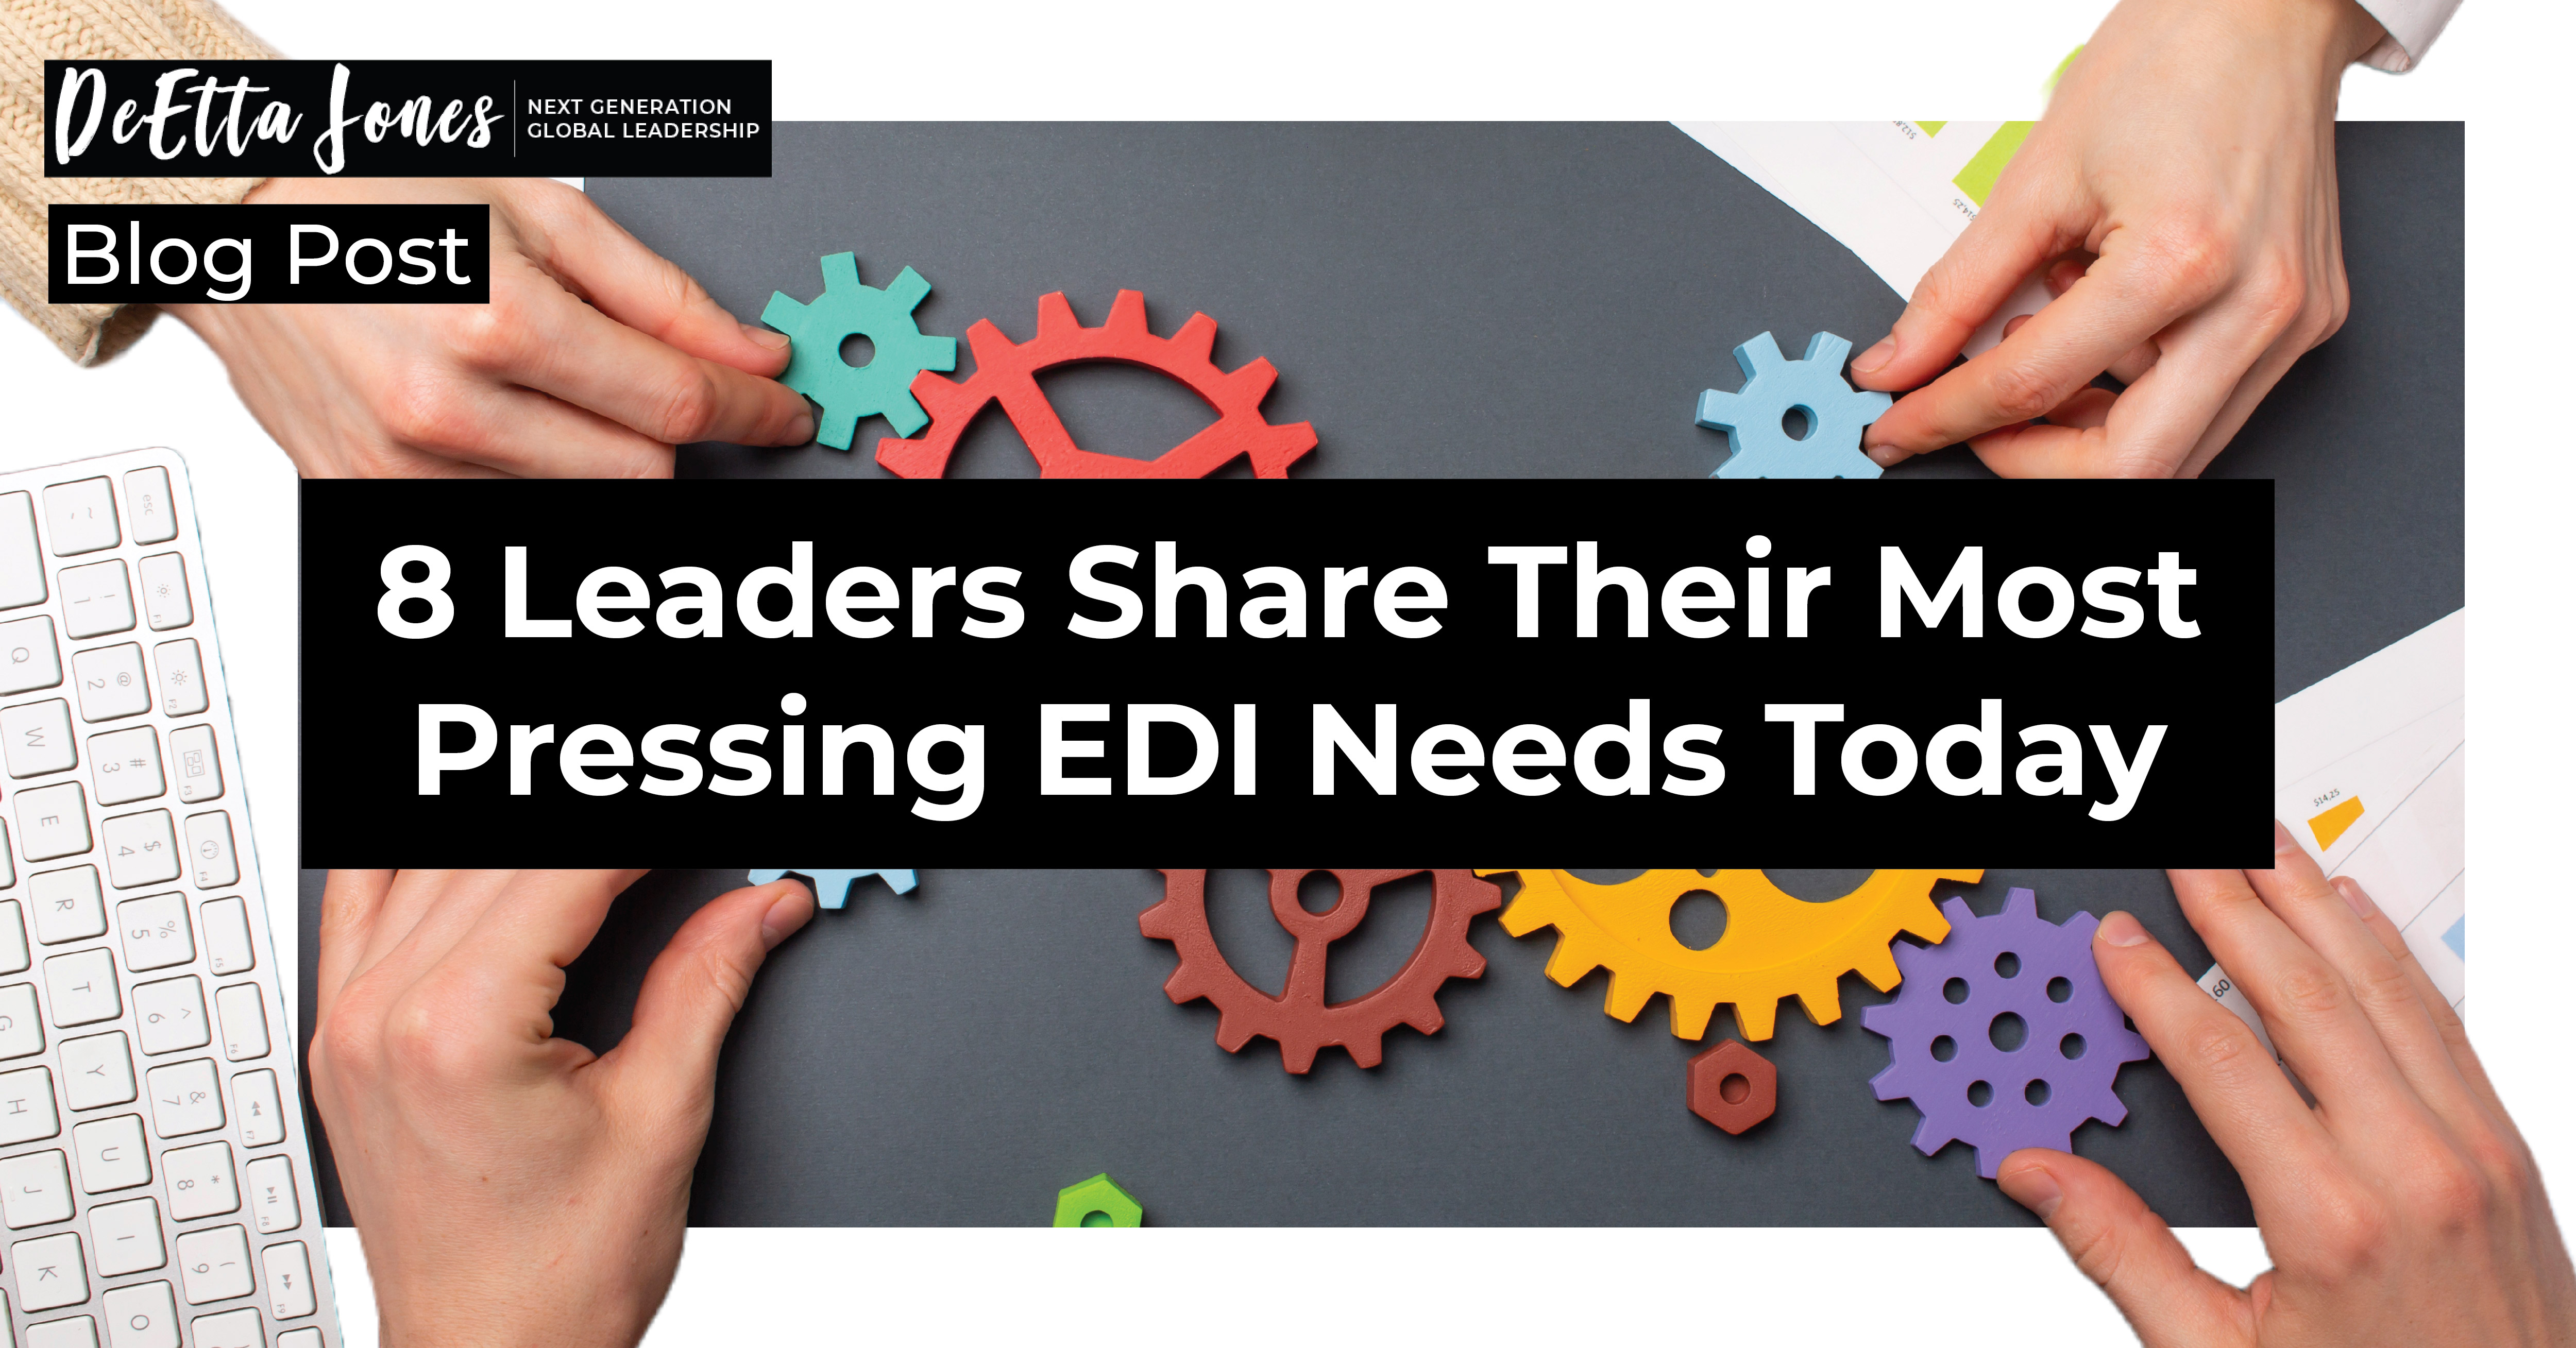 8 Leaders Share Their Most Pressing EDI Needs